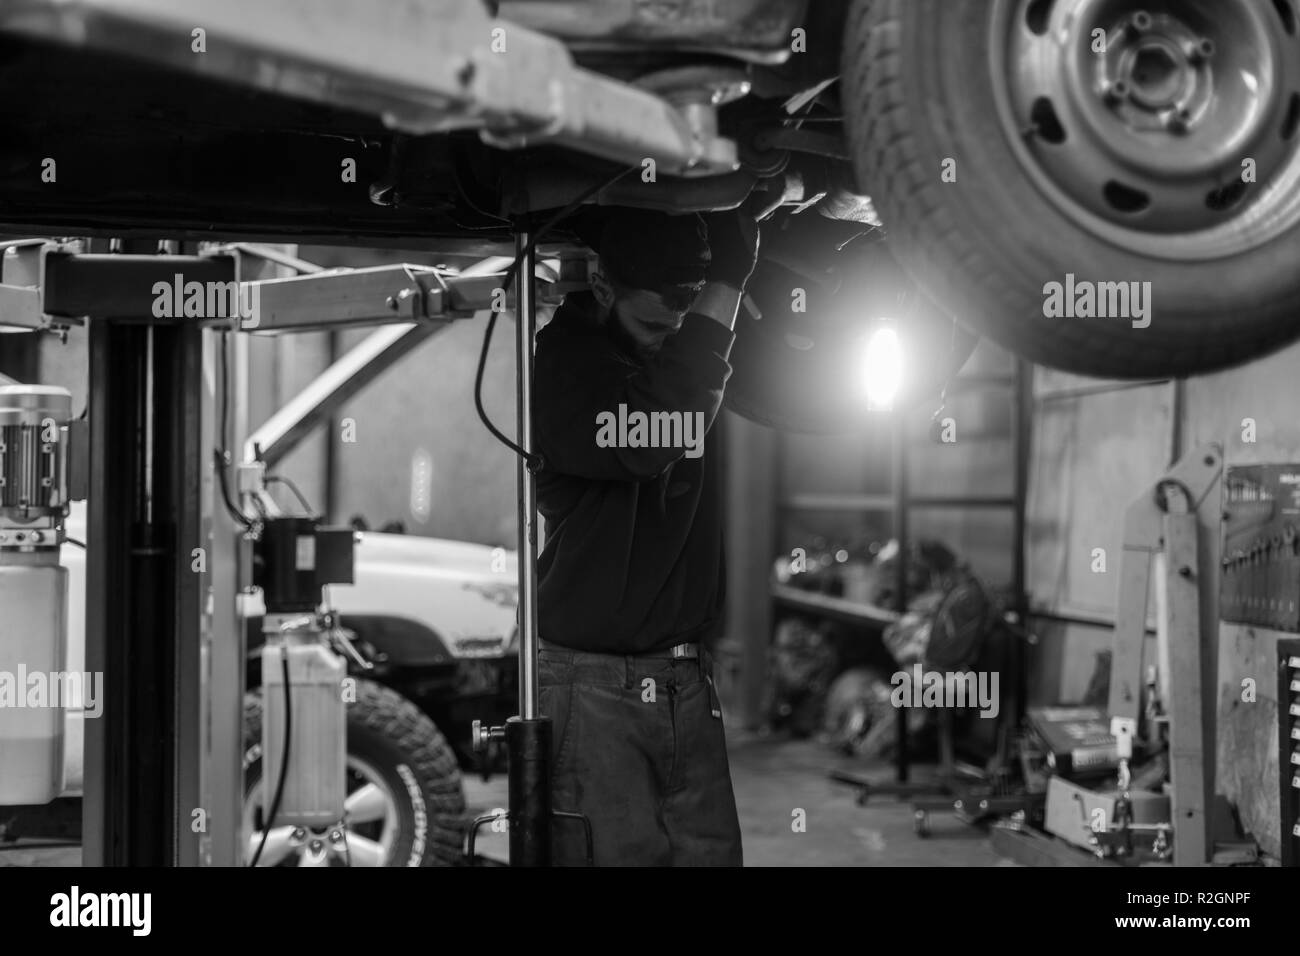 Young caucasian man repairing car with professional tools Stock Photo